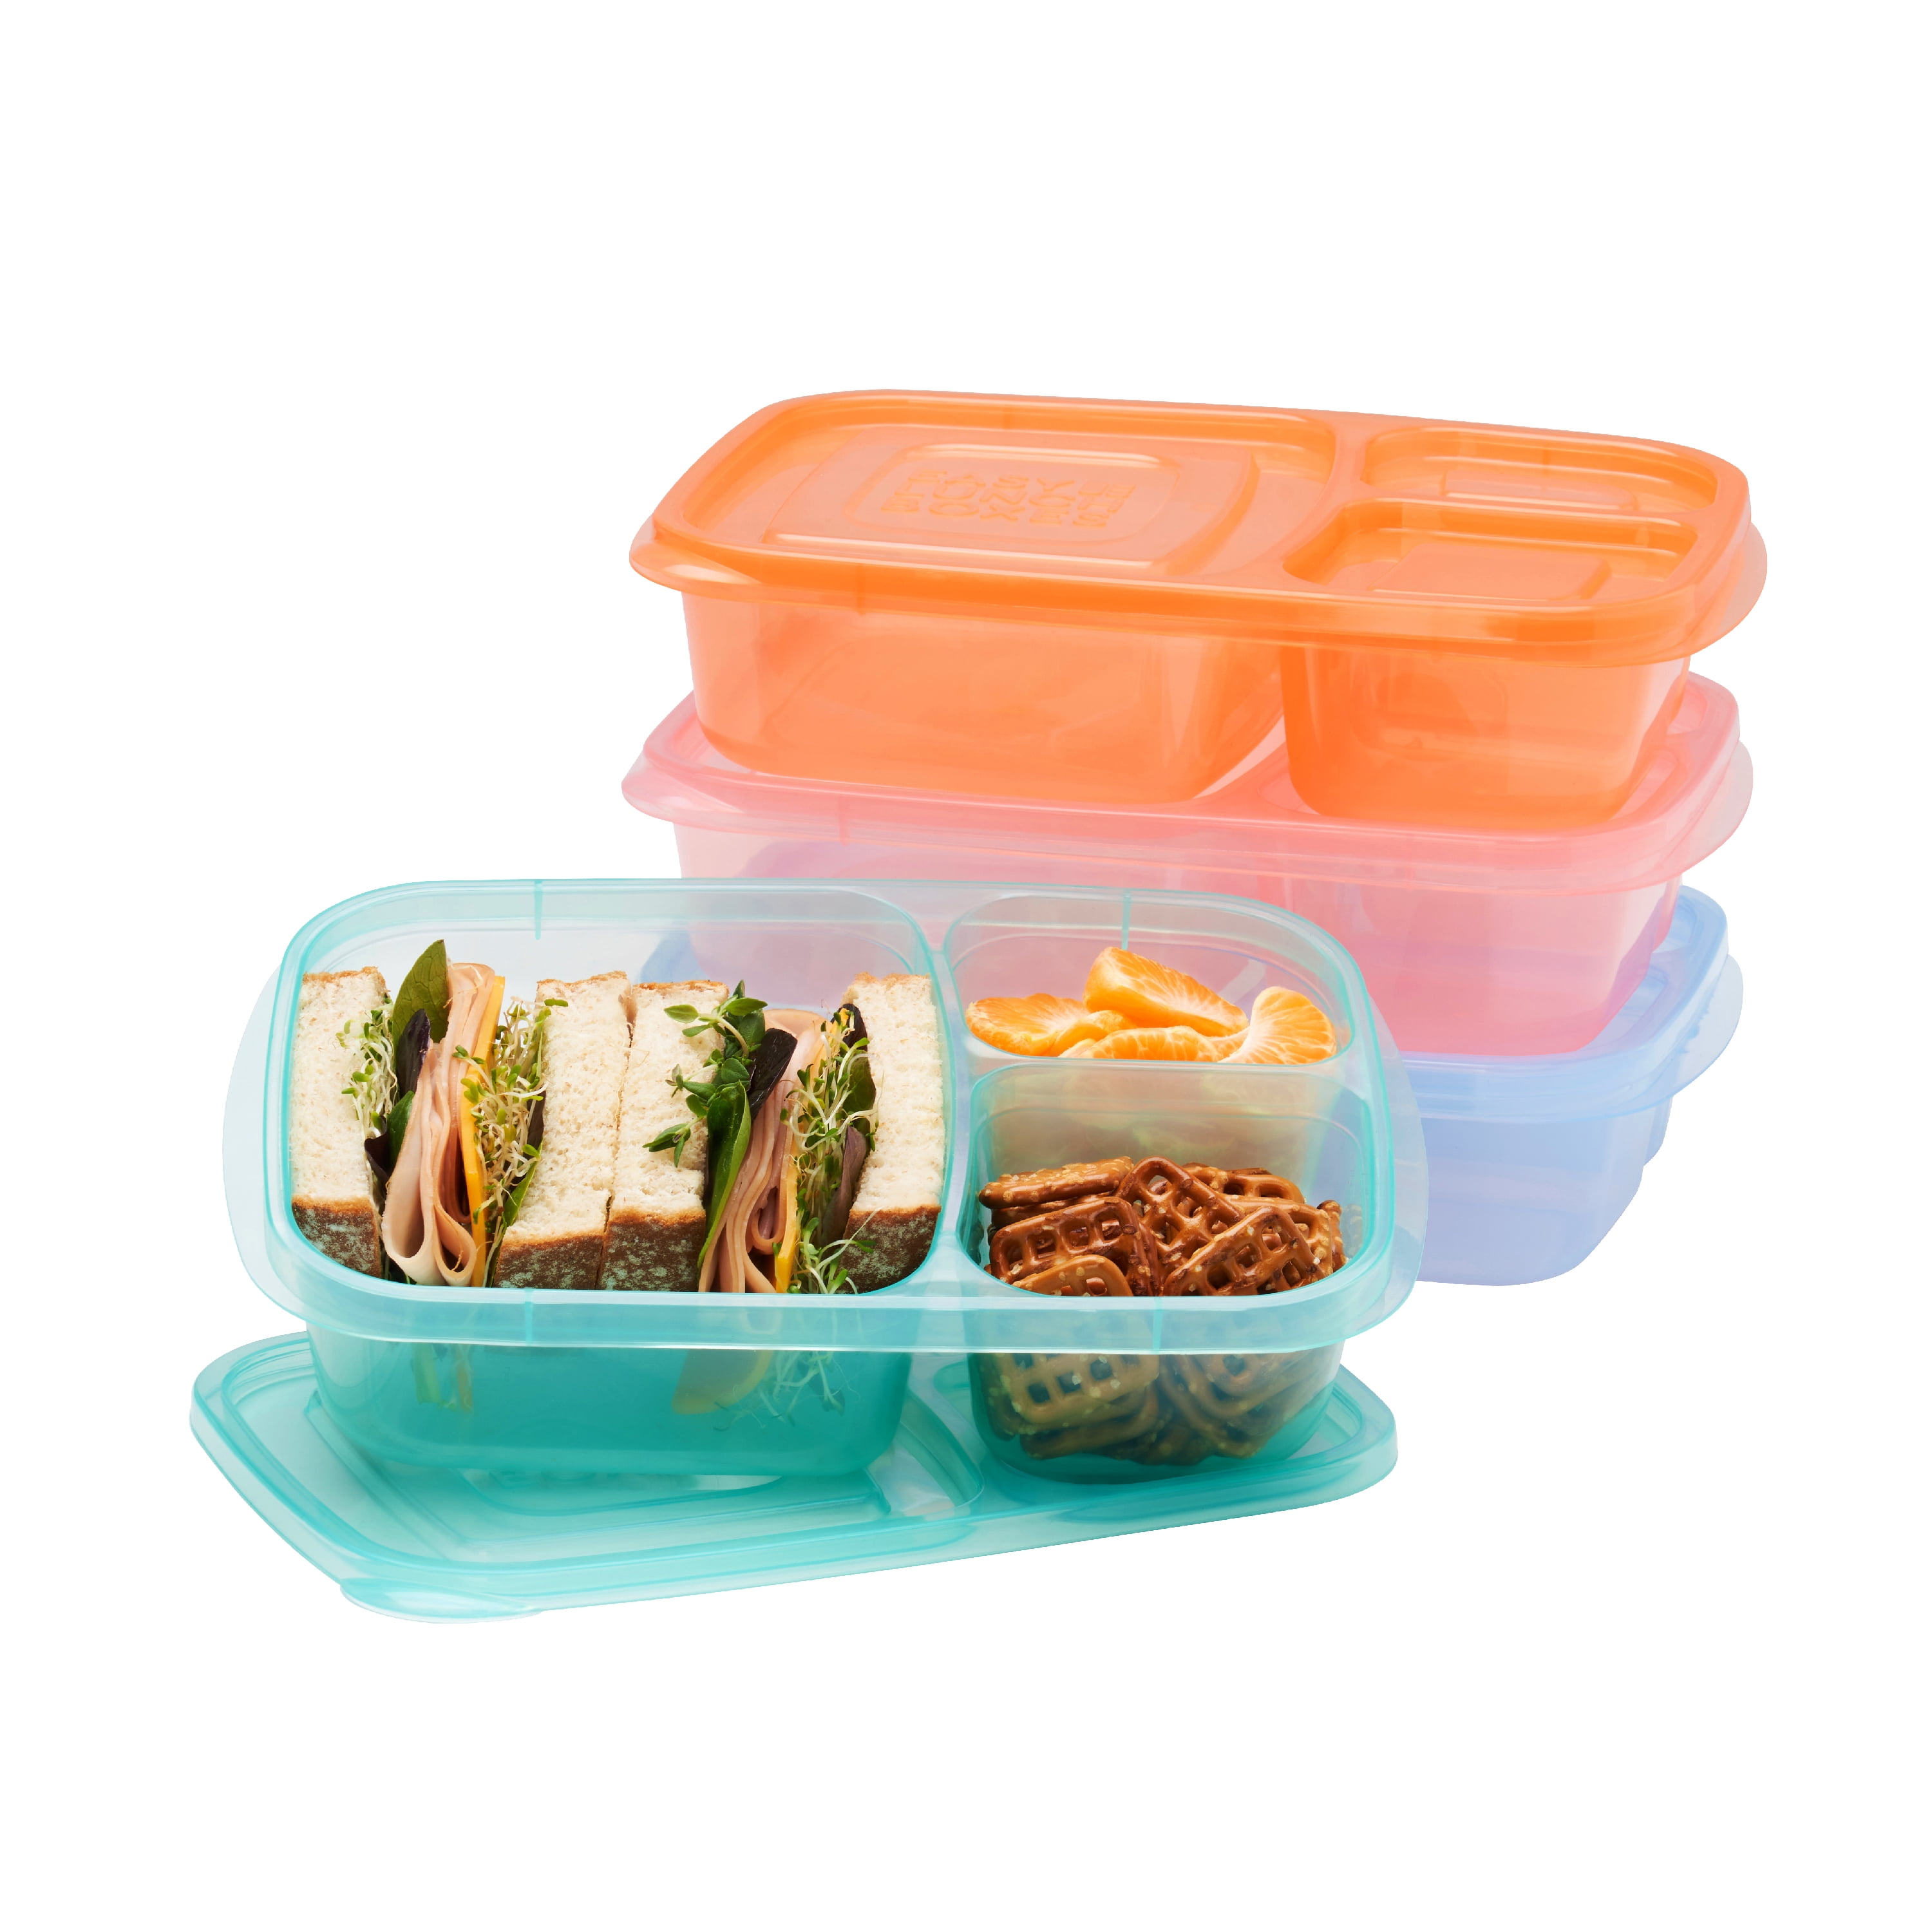 The Best Bento Boxes, Supplies & Tools To Take Your School Lunches